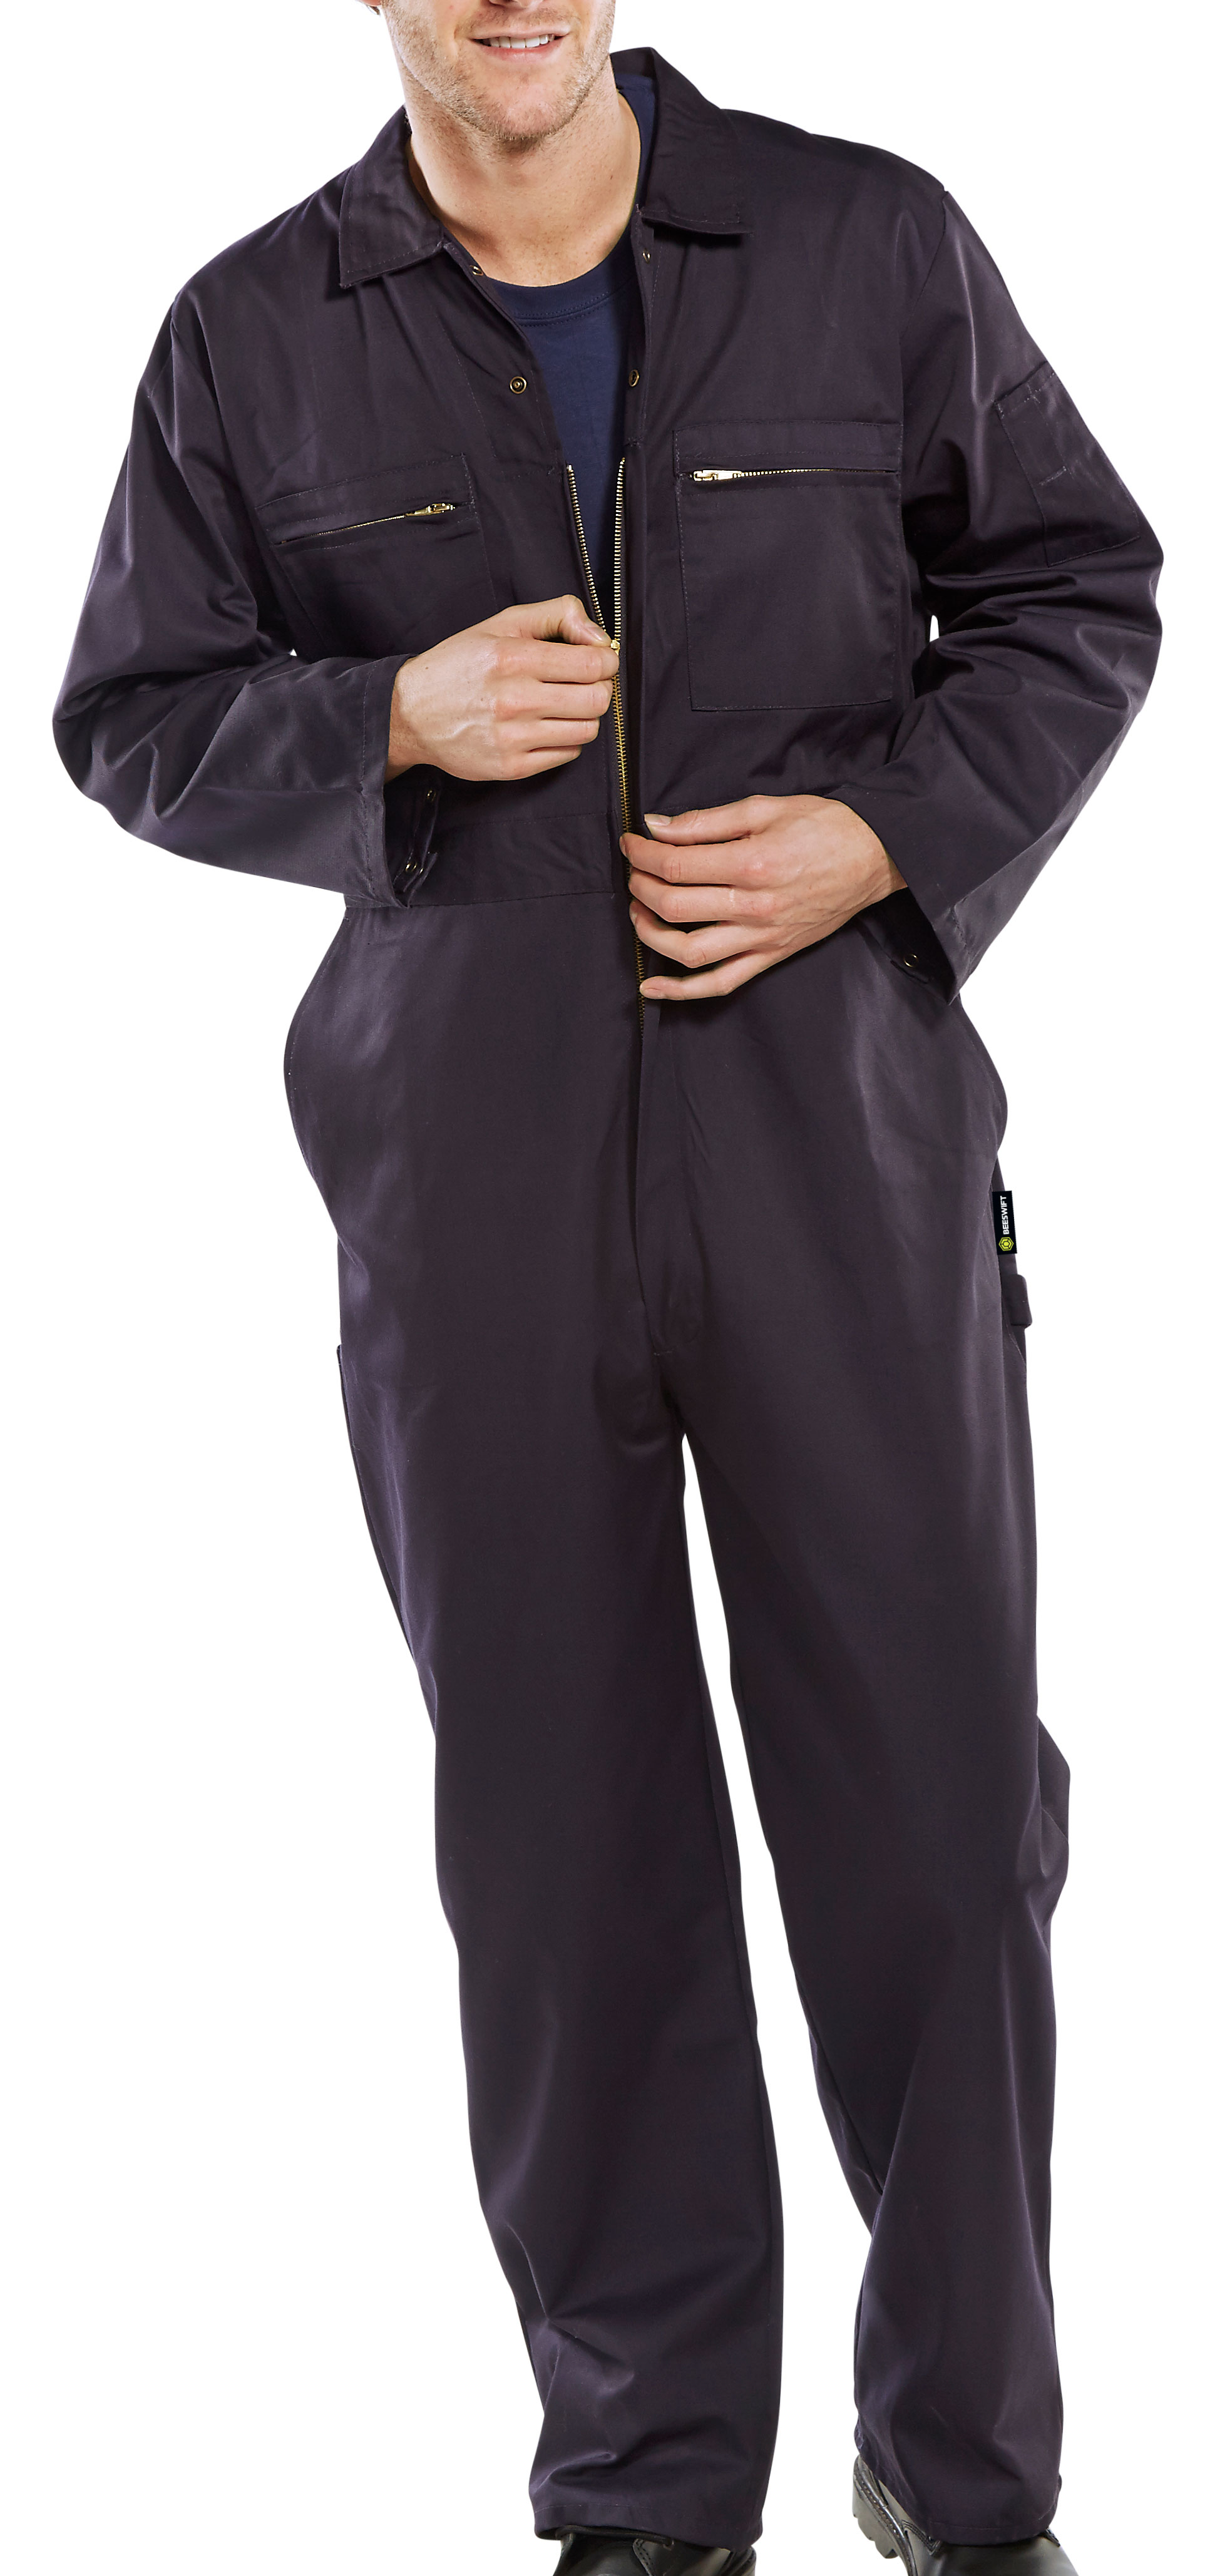 NEW Click Boilersuit Coverall Overalls Navy Blue Black Blue ALL SIZES 